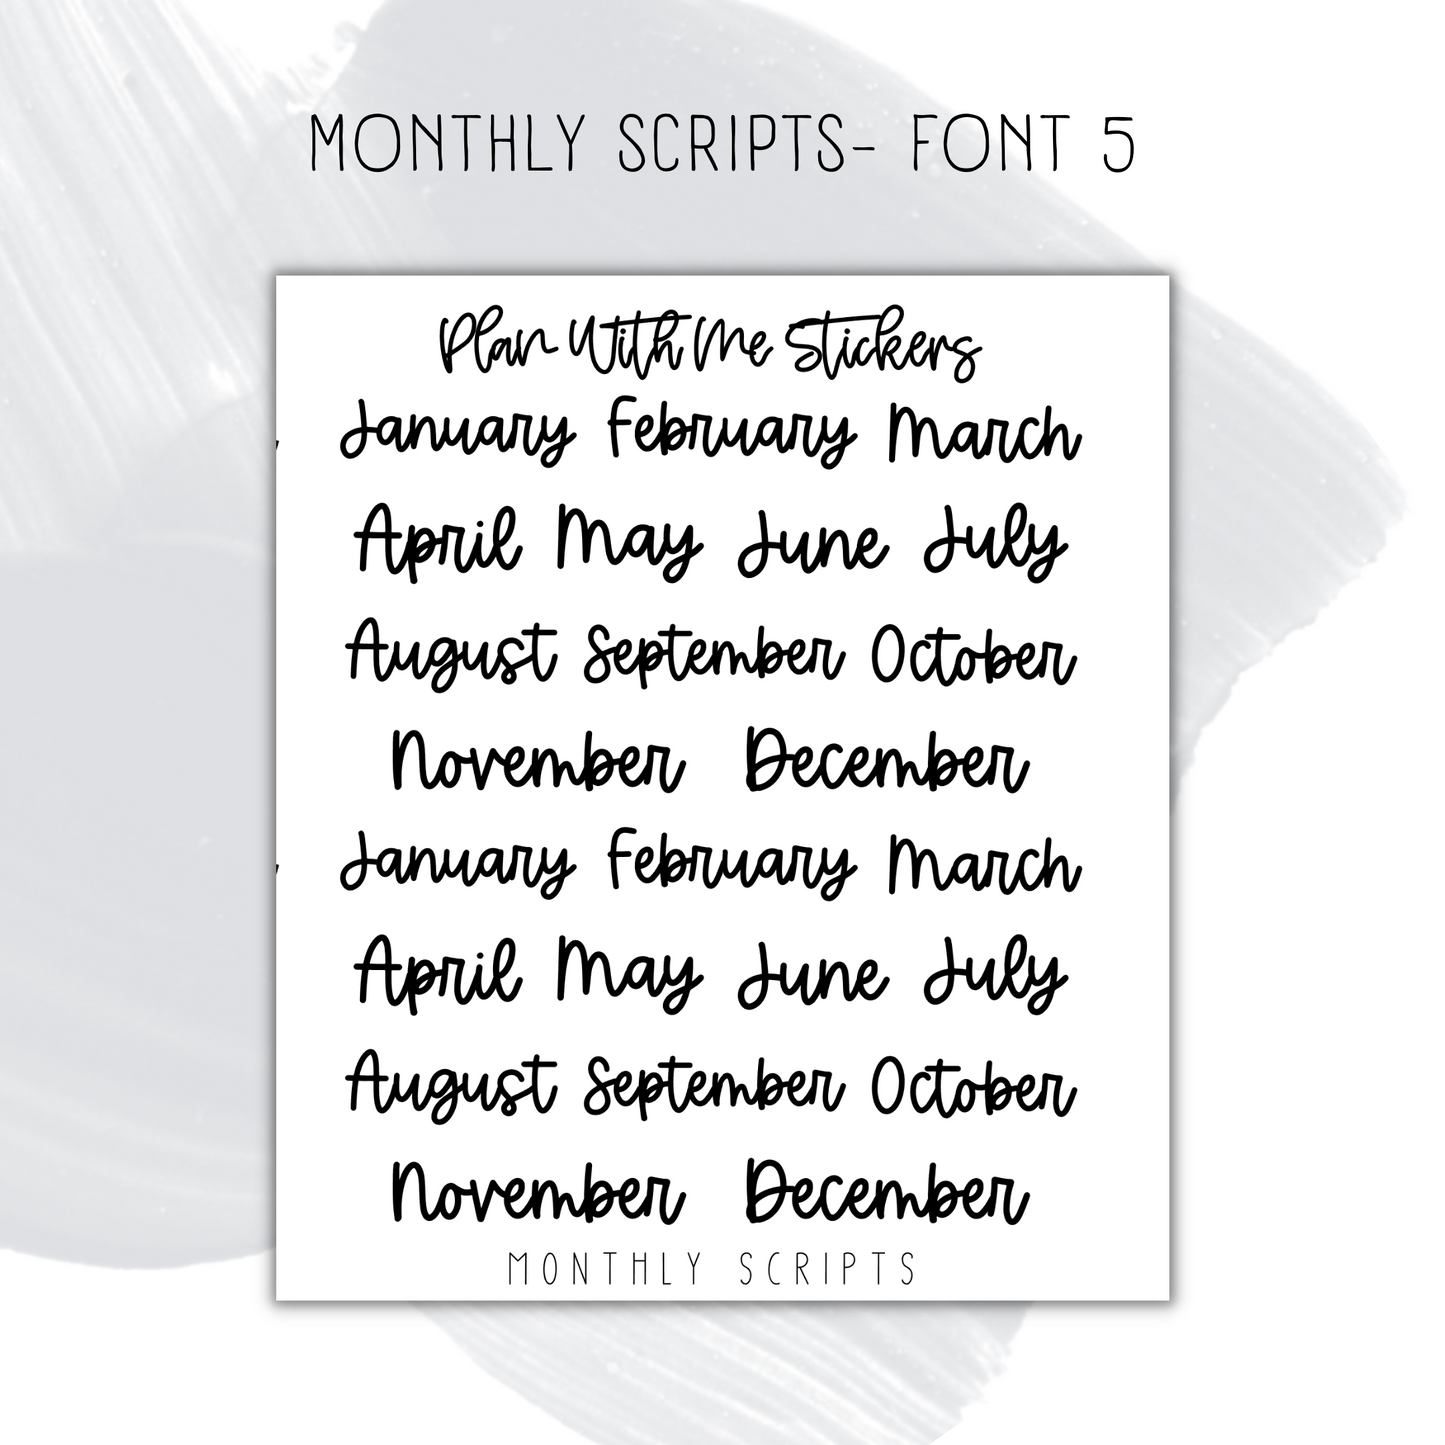 Monthly Scripts- Font 5